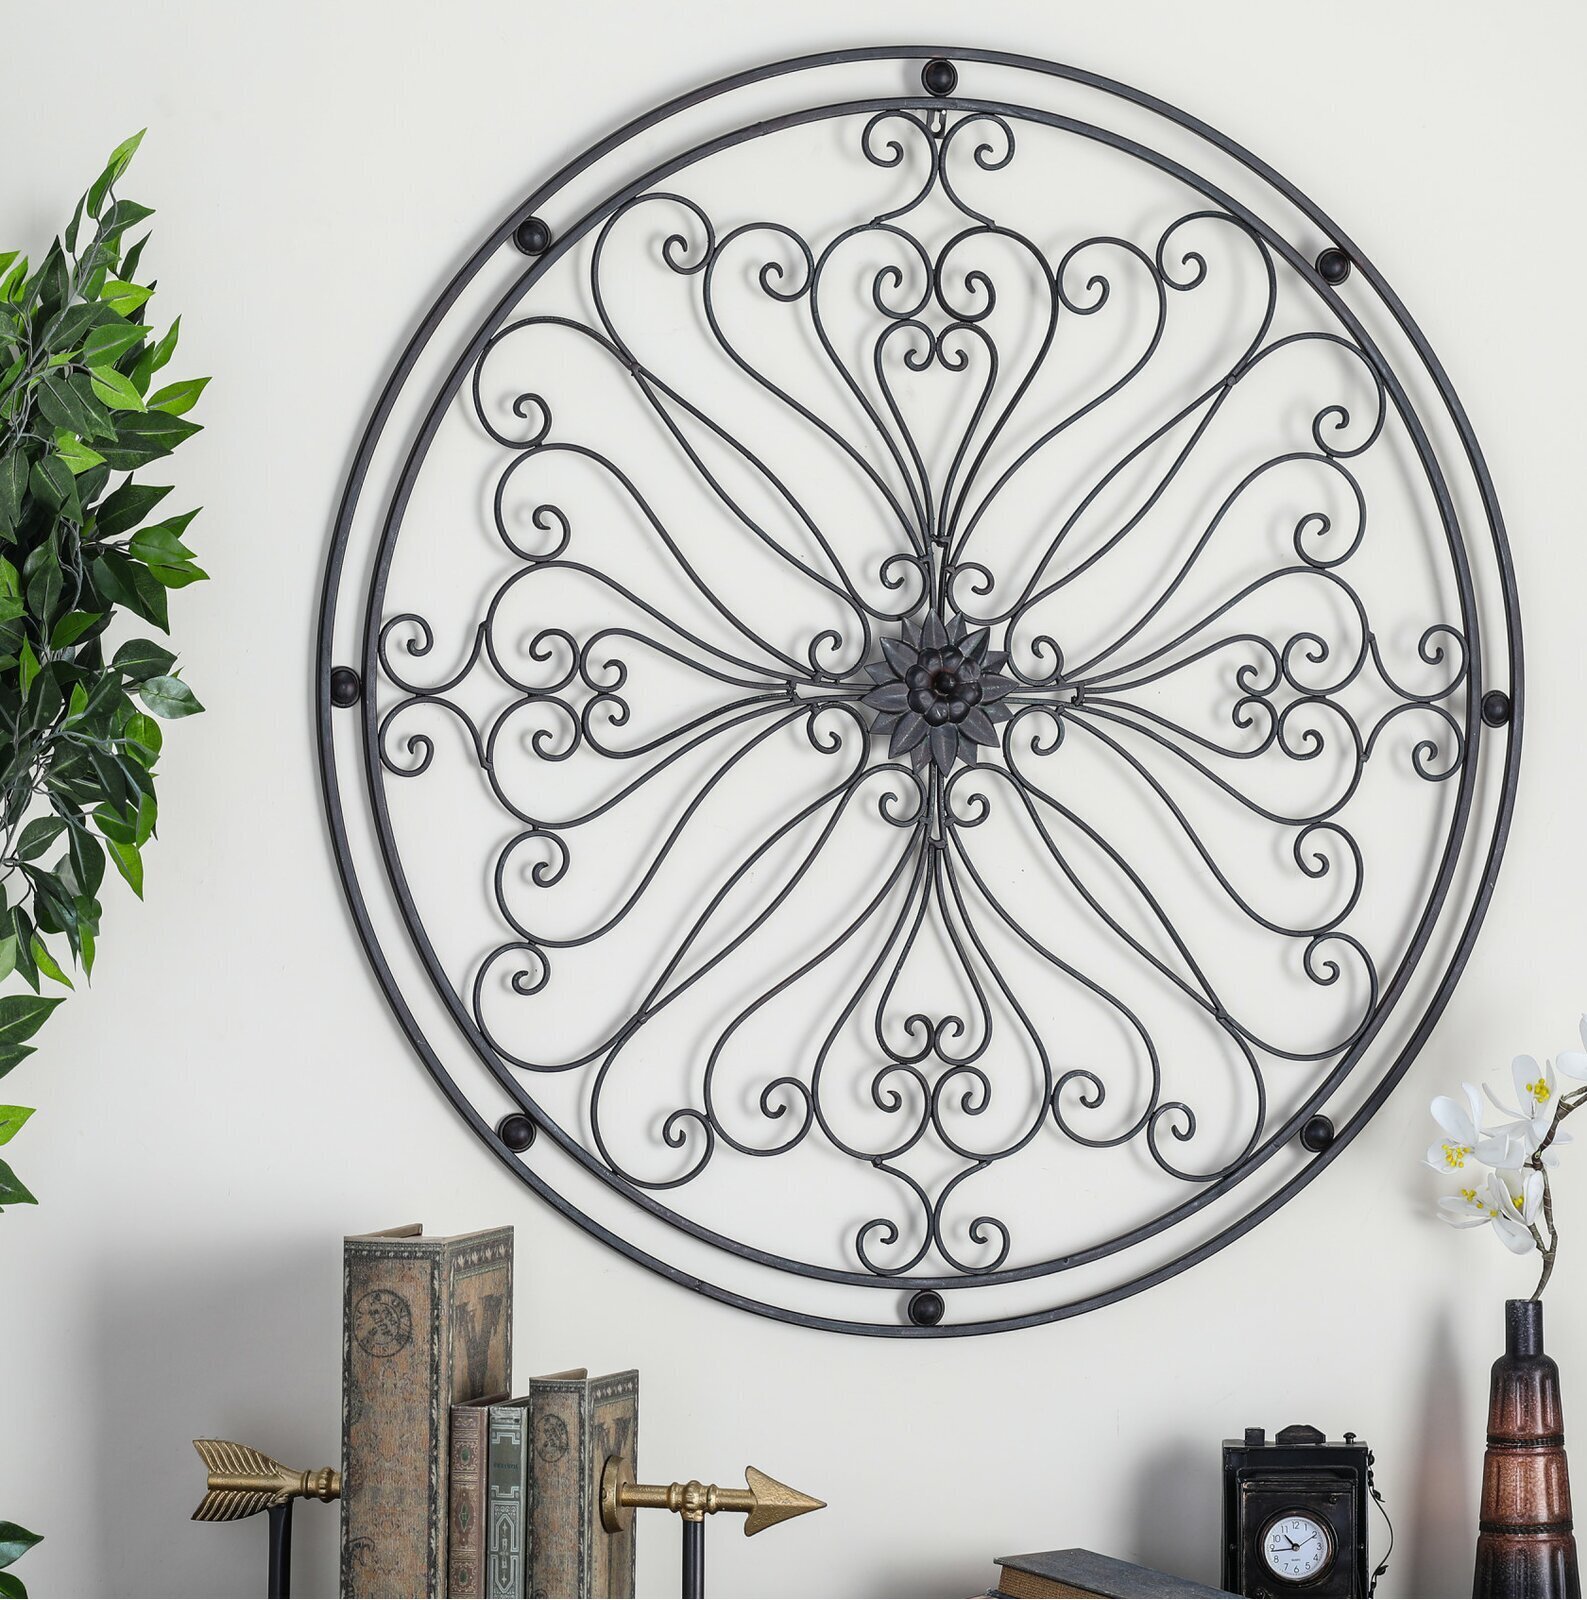 Antique inspired round wall art